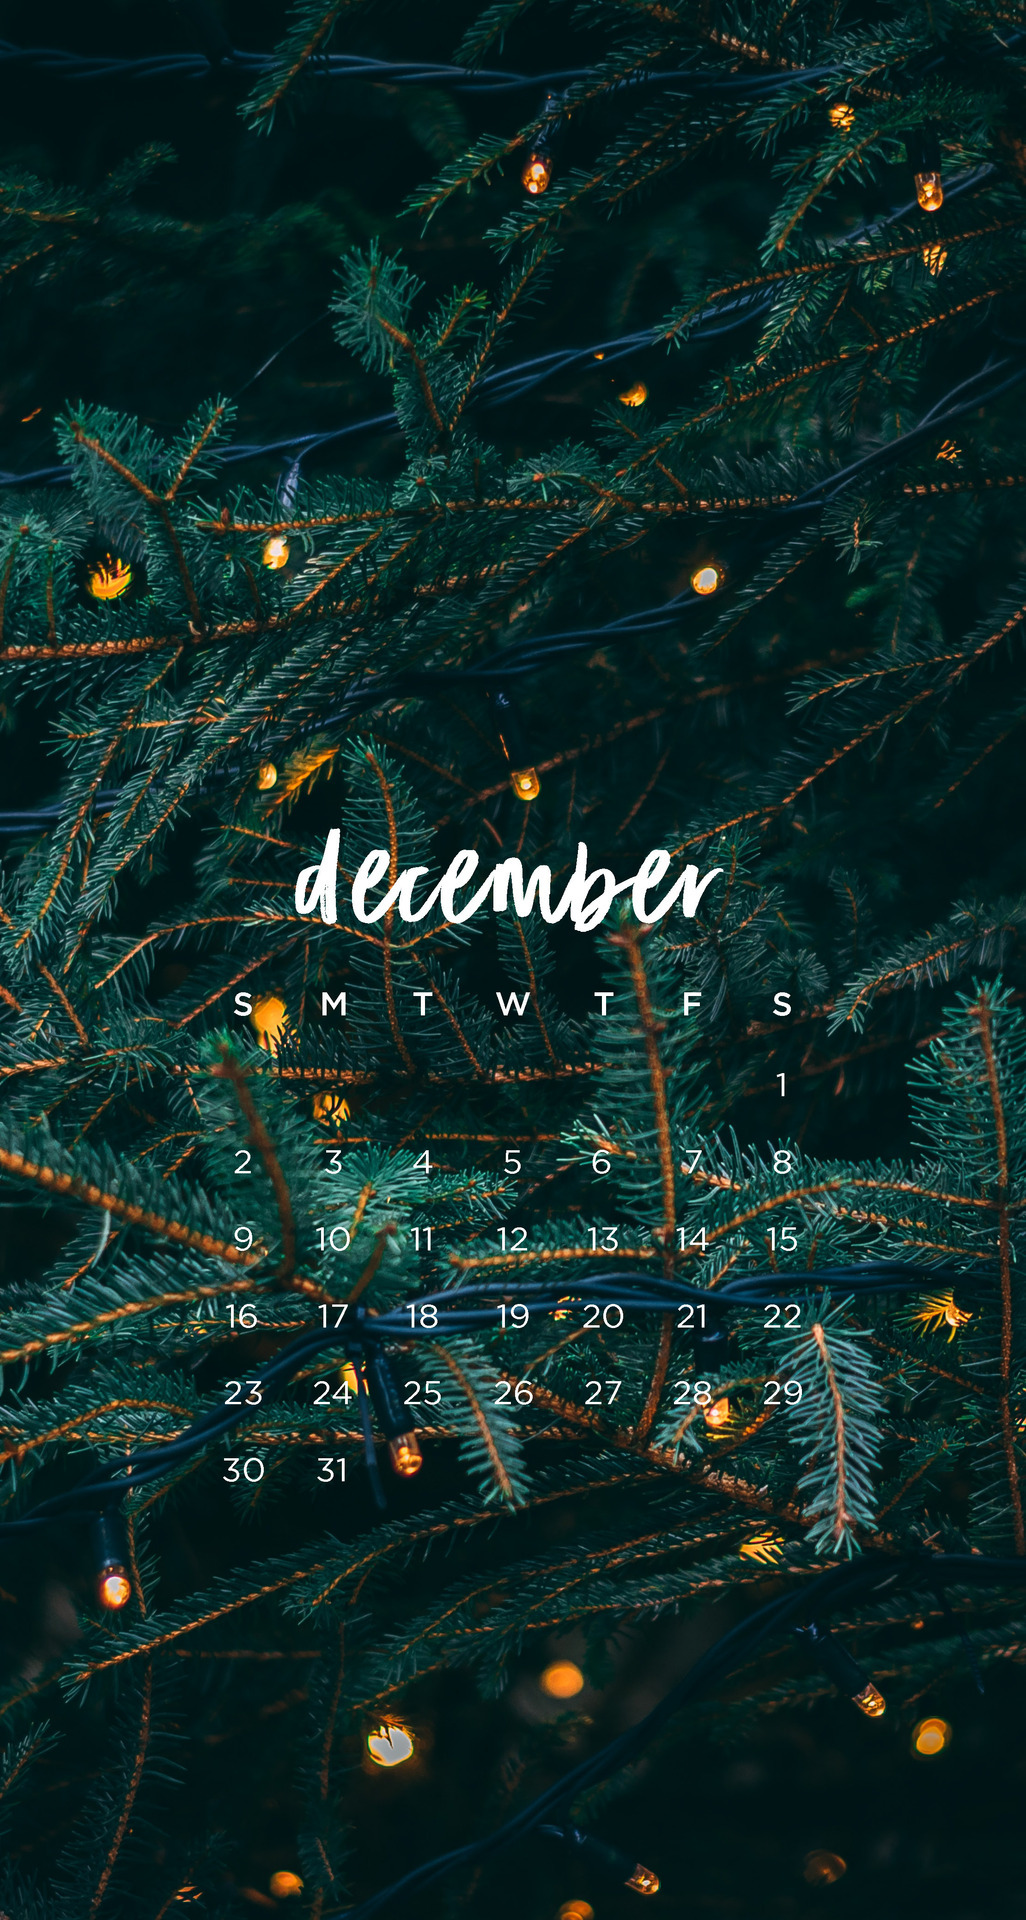 Free download emmas studyblr December Forest Phone Wallpapers Here are